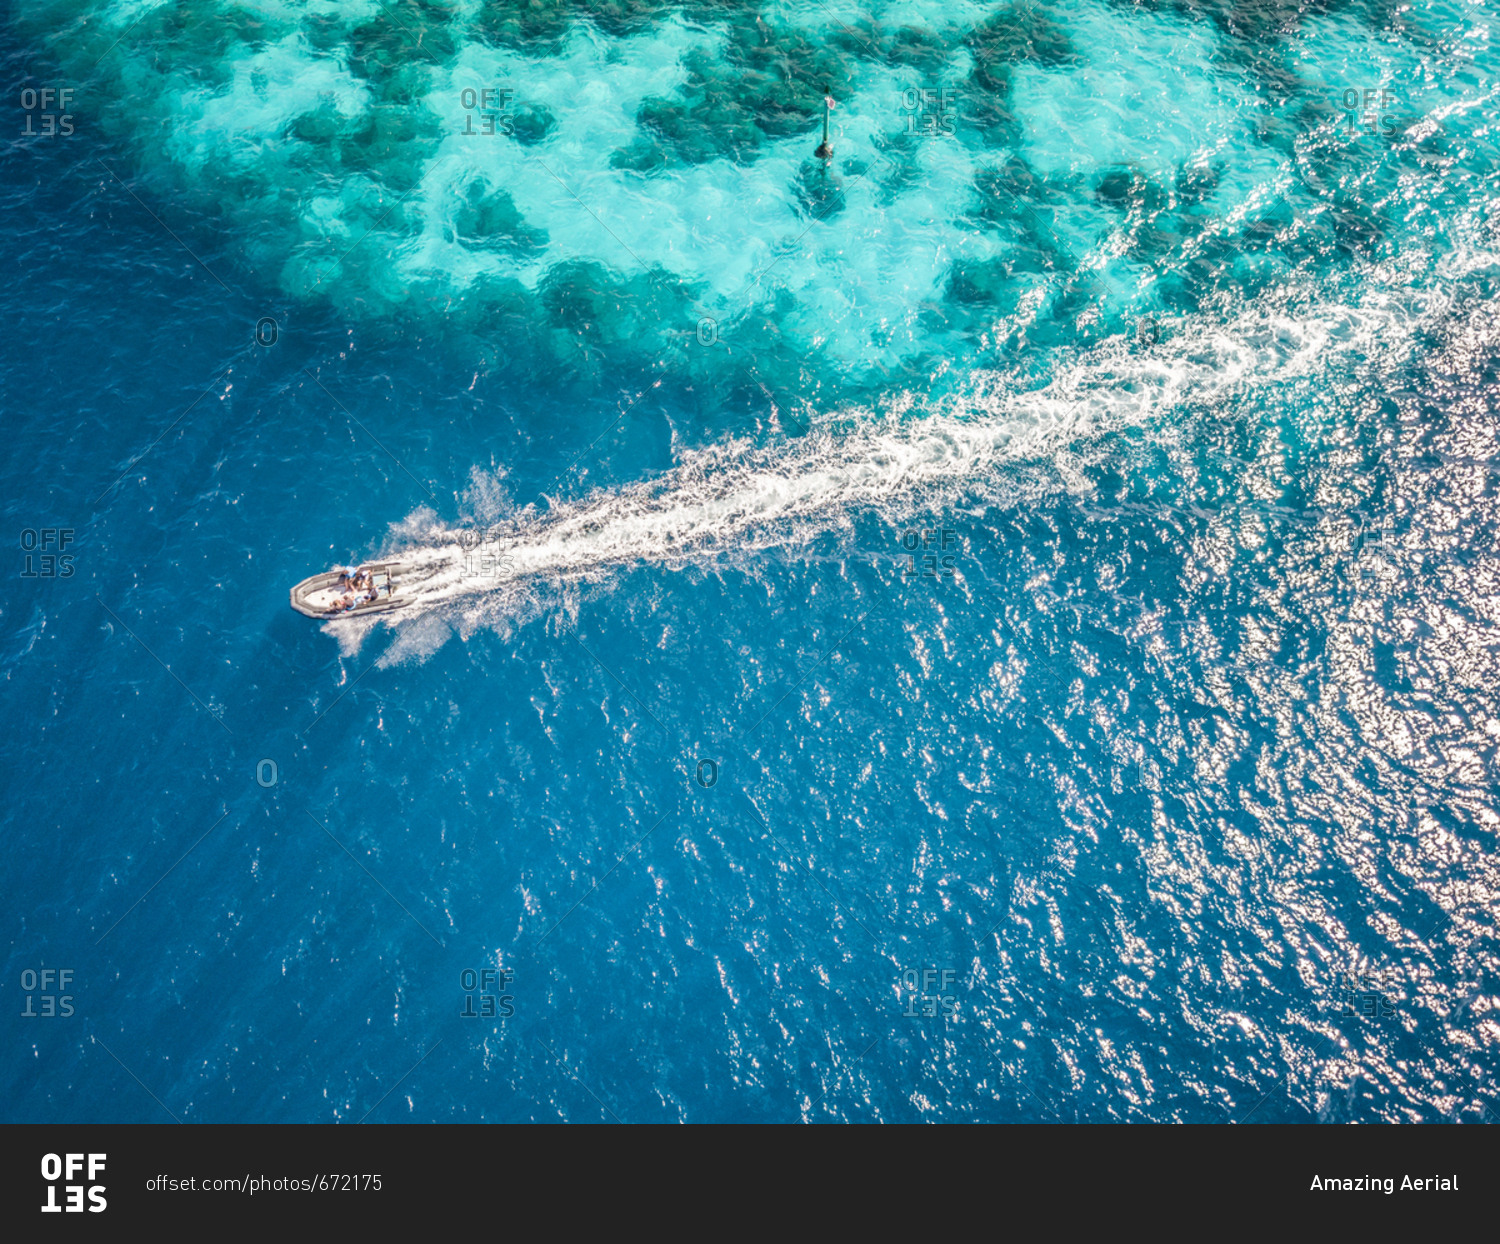 Aerial view of people in a boat in the turquoise sea of Bora-Bora, French Polynesia.